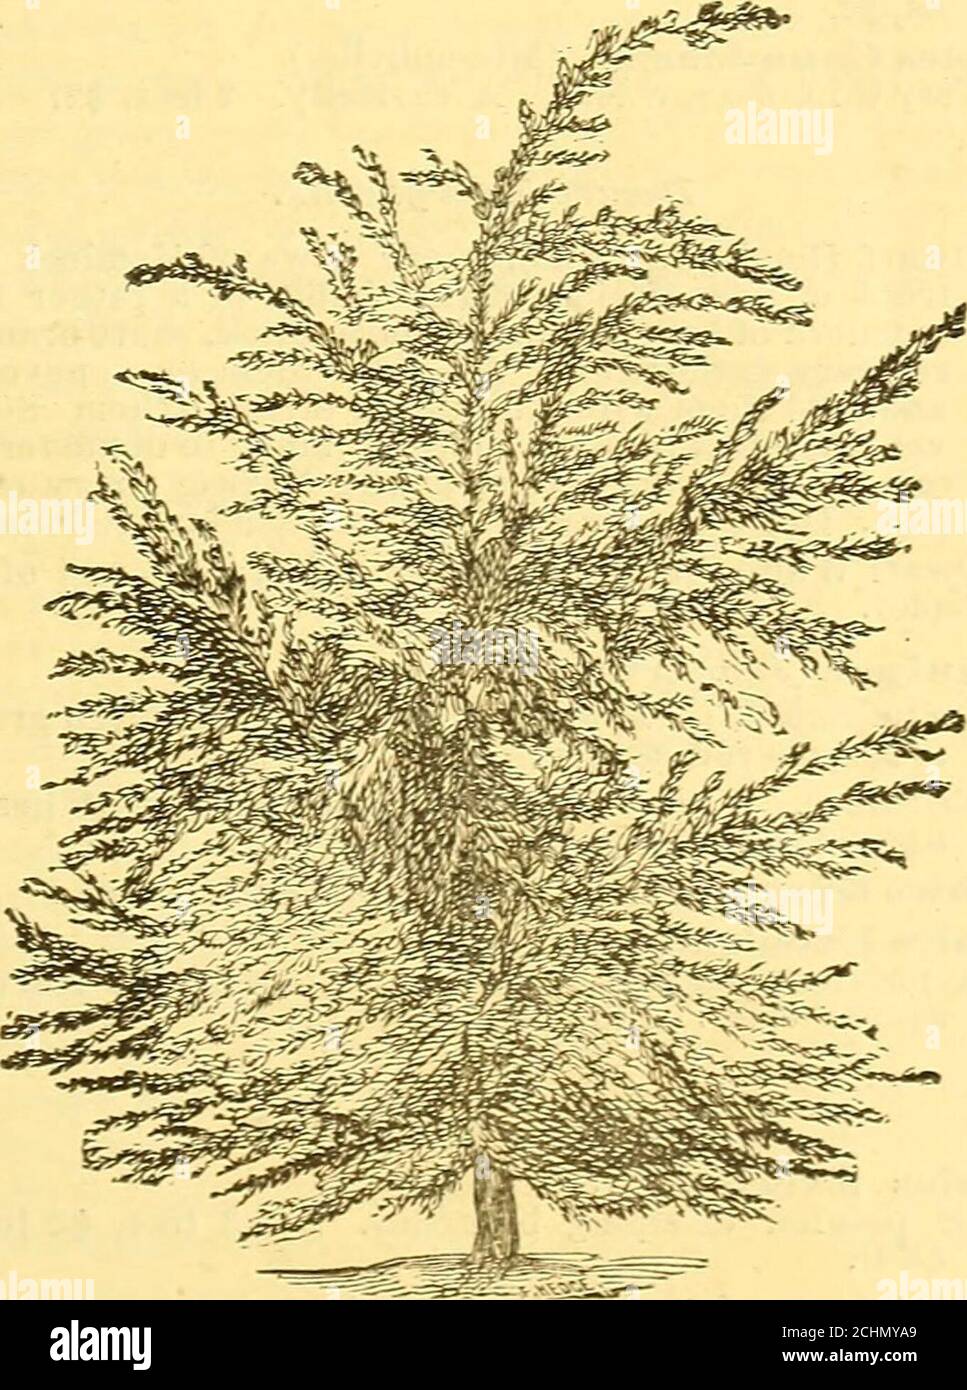 . Reading Nursery : [catalog] 1875. . telue Spruce. Engelmanni. Engelmanns Spruce. From the coldsub-alpine districts of the Rocky Mountains. Itmakes a stately tree GO to 100 feet high, forming anarrow, sharply tapering spire of a rather darkishhue, with the under surface of leaves showing a sil-very color. [The trees of this variety are yet of smallsize.] Price, 1 foot, 50c. Oriental Spruce. From the East, near the shores ofthe Black Sea. A di-tinct and most worthy tree.Scarce. Price,  to 2 feet. SI to $1.50.. Xatural-formed Hemlock. Hemlock or Weeping Spruce {Canadensis). An elegantpyramida Stock Photo